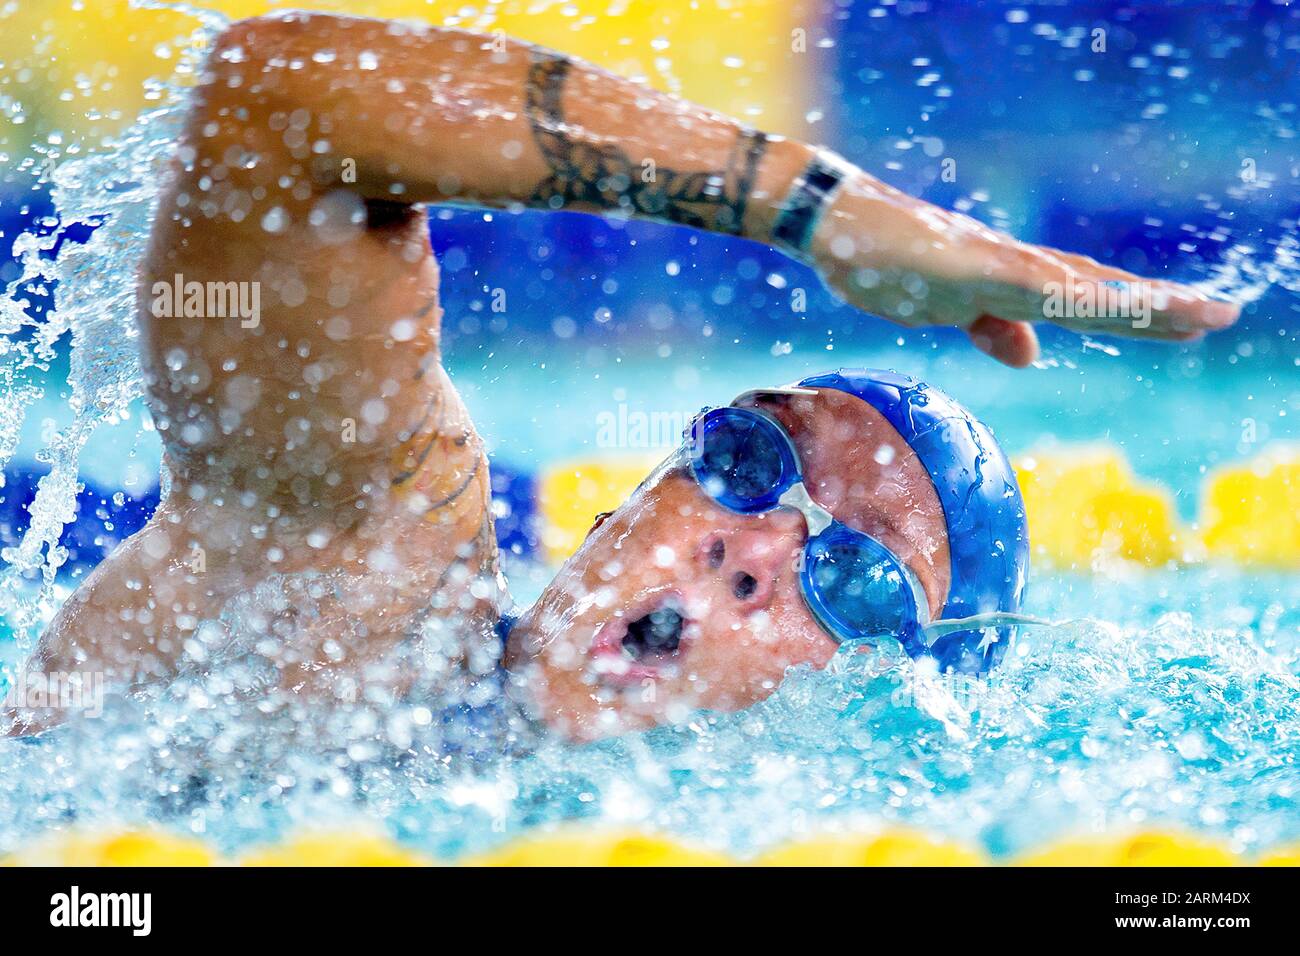 190629-D-DB155-003 Air Force Staff Sgt. Kristina Coble swims freestyle during the 2019 DoD Warrior Games in Tampa, Florida June 29, 2019.  (DoD photo by EJ Hersom) Stock Photo